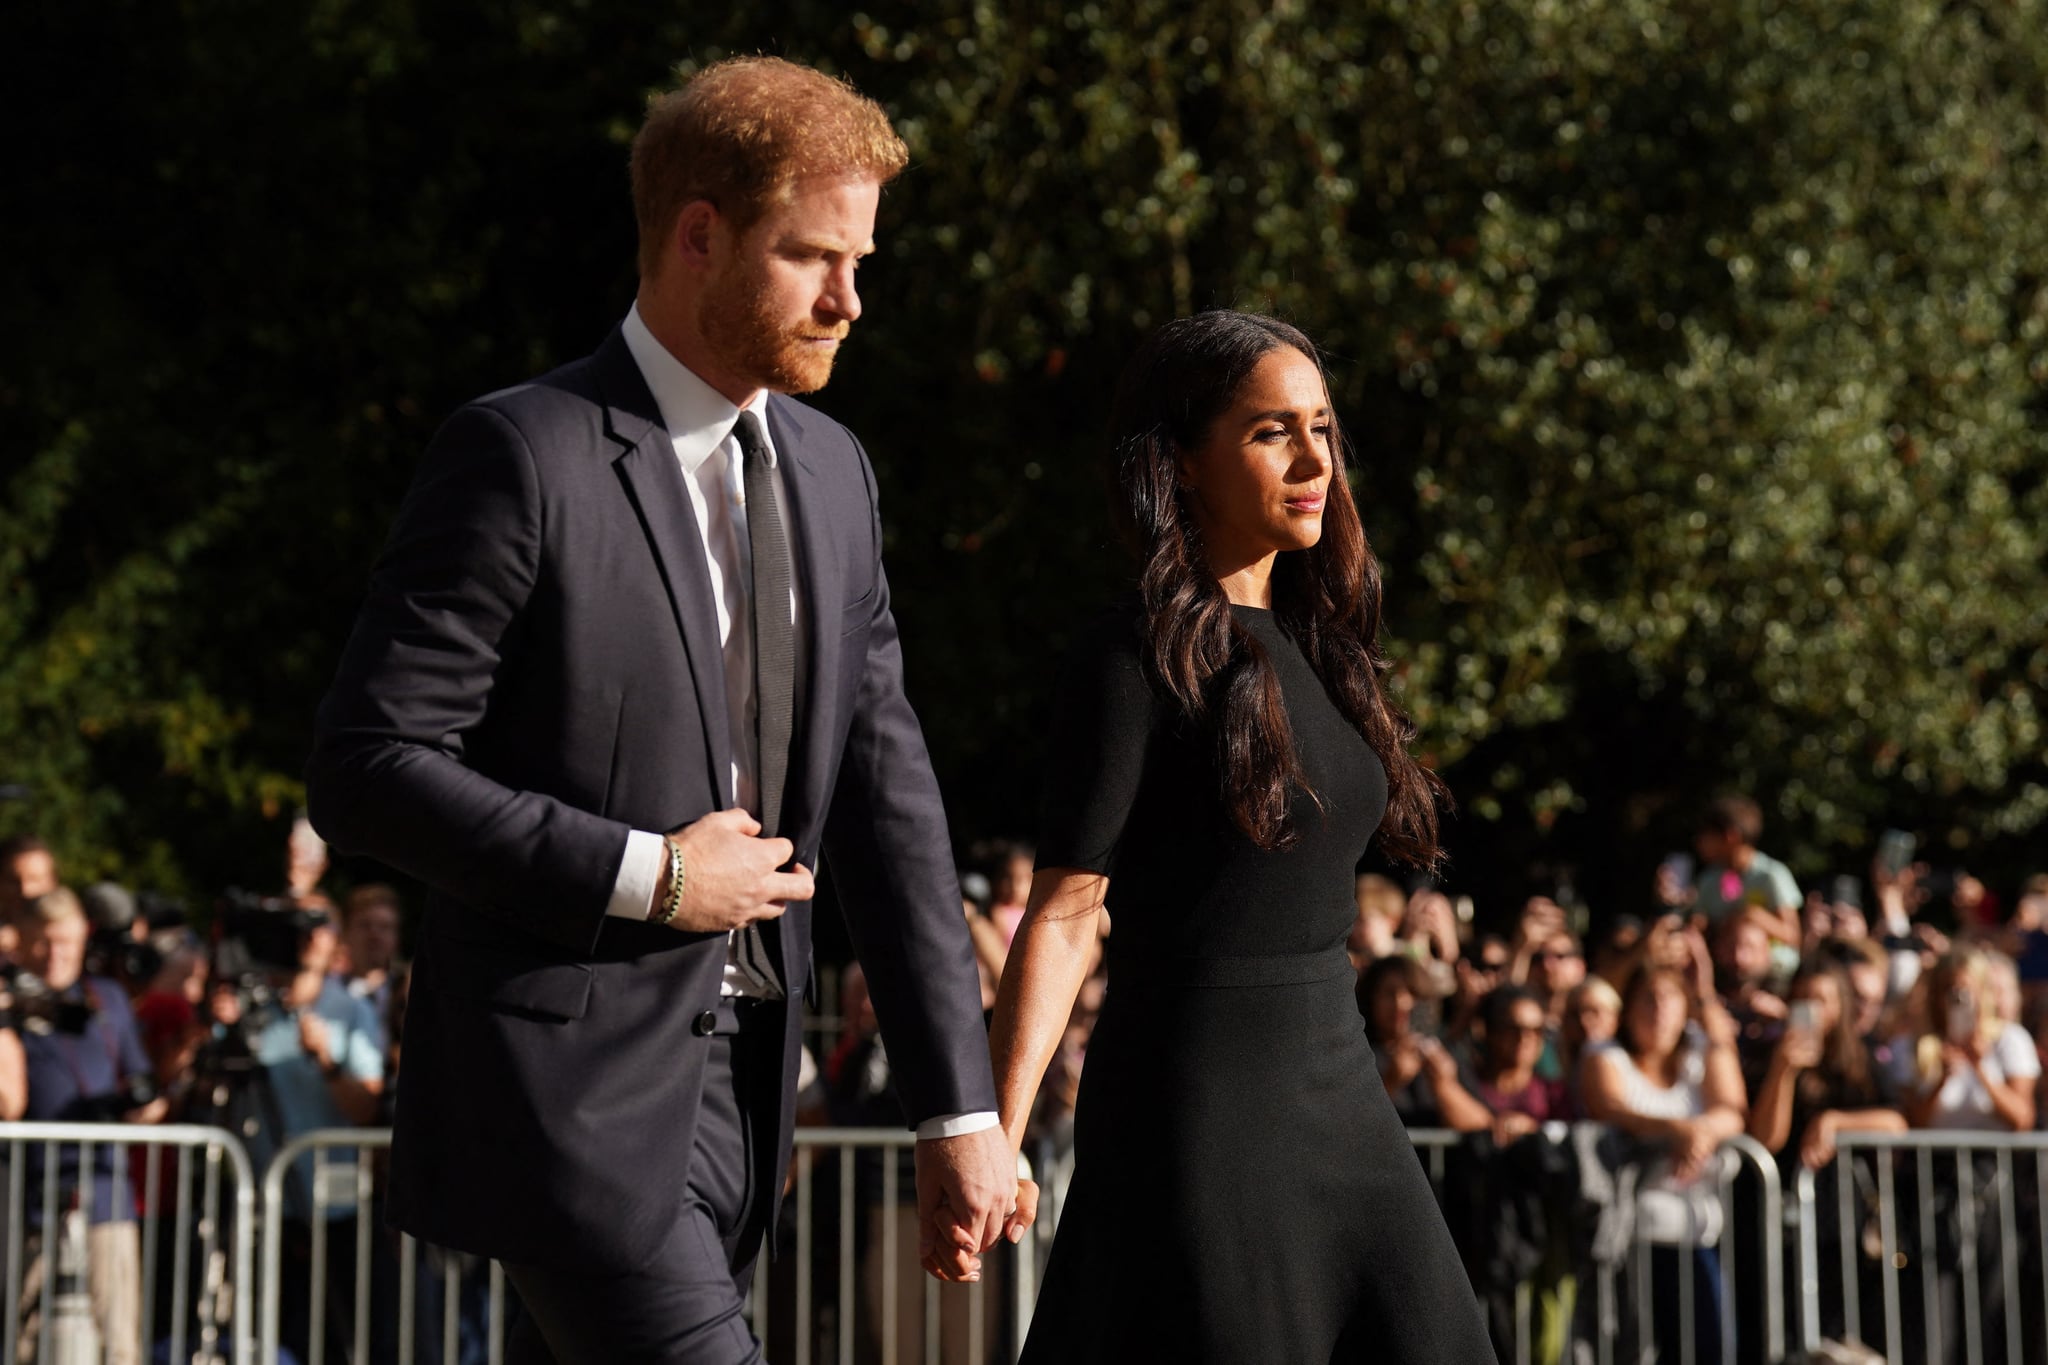 Britain's Prince Harry, Duke of Sussex (L) and Meghan, Duchess of Sussex (R) arrive to look at floral tributes on the Long walk at Windsor Castle on September 10, 2022, two days after the death of Britain's Queen Elizabeth II at the age of 96. - King Charles III pledged to follow his mother's example of 